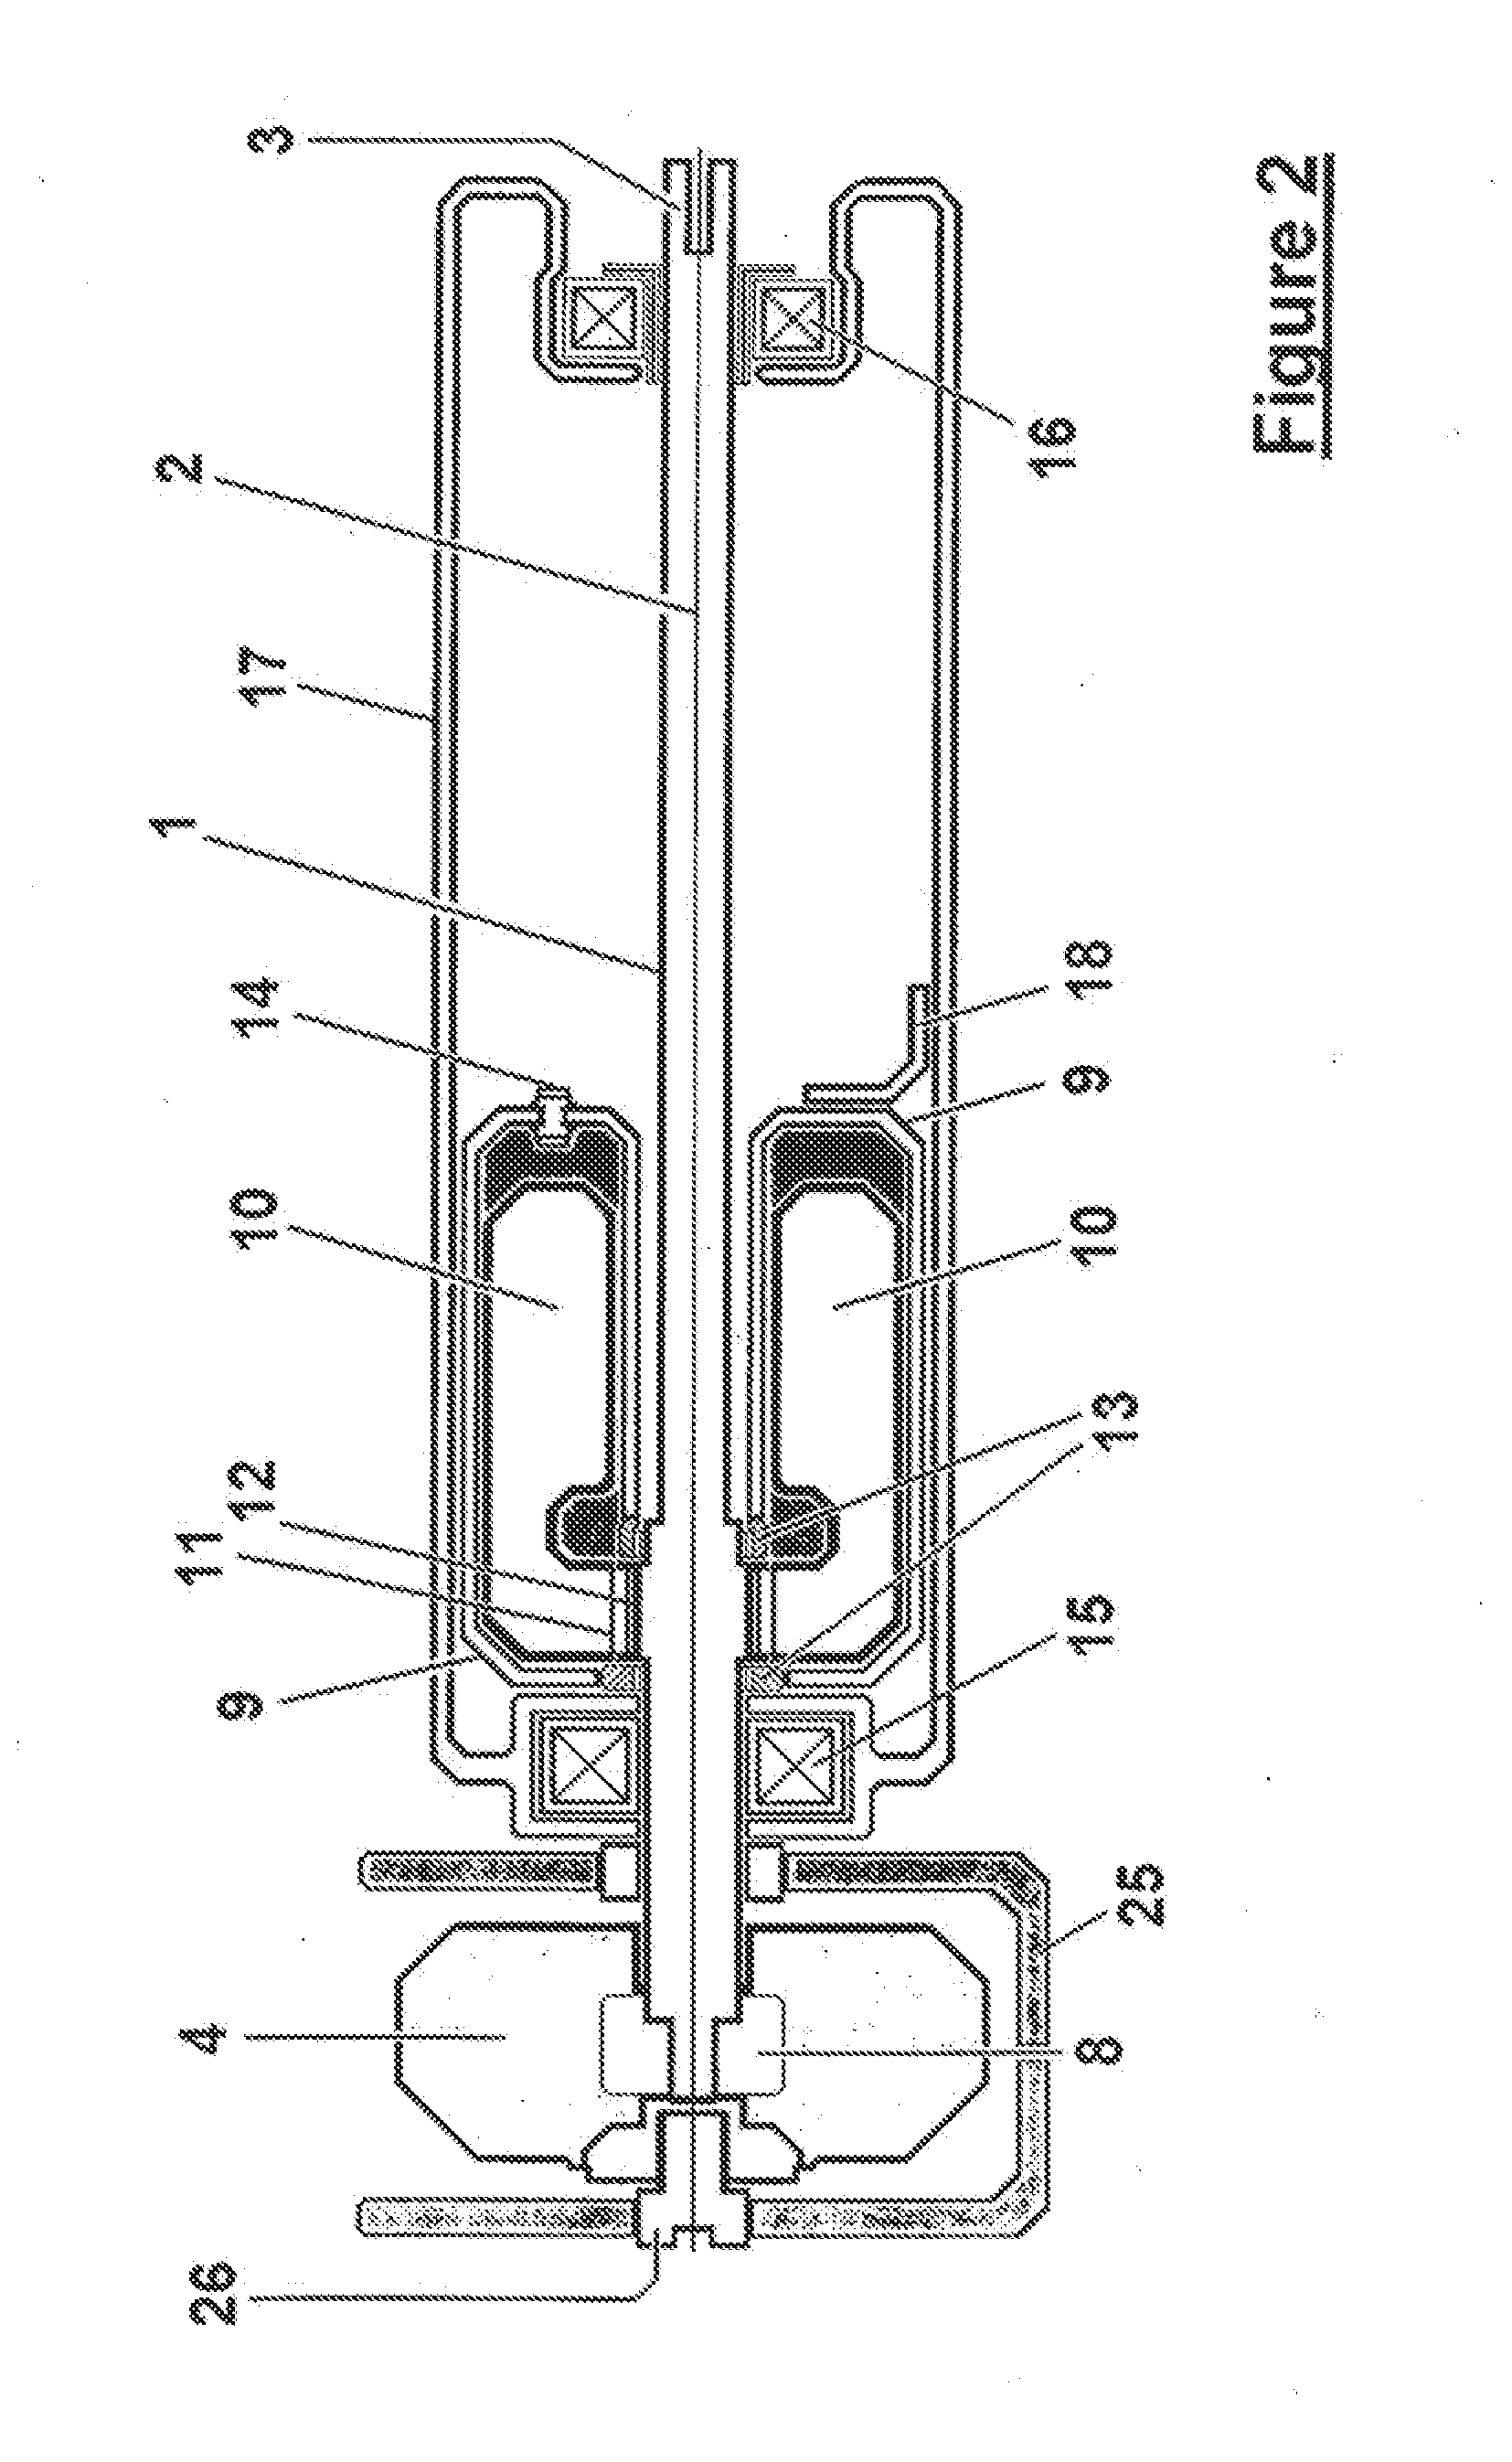 Parametric chassis system for vehicles, comprising four suspension elements, incorporating a lateral torsion bar and co-axial damper unit, in a box-module, that allows central location of heavy items, such as batteries